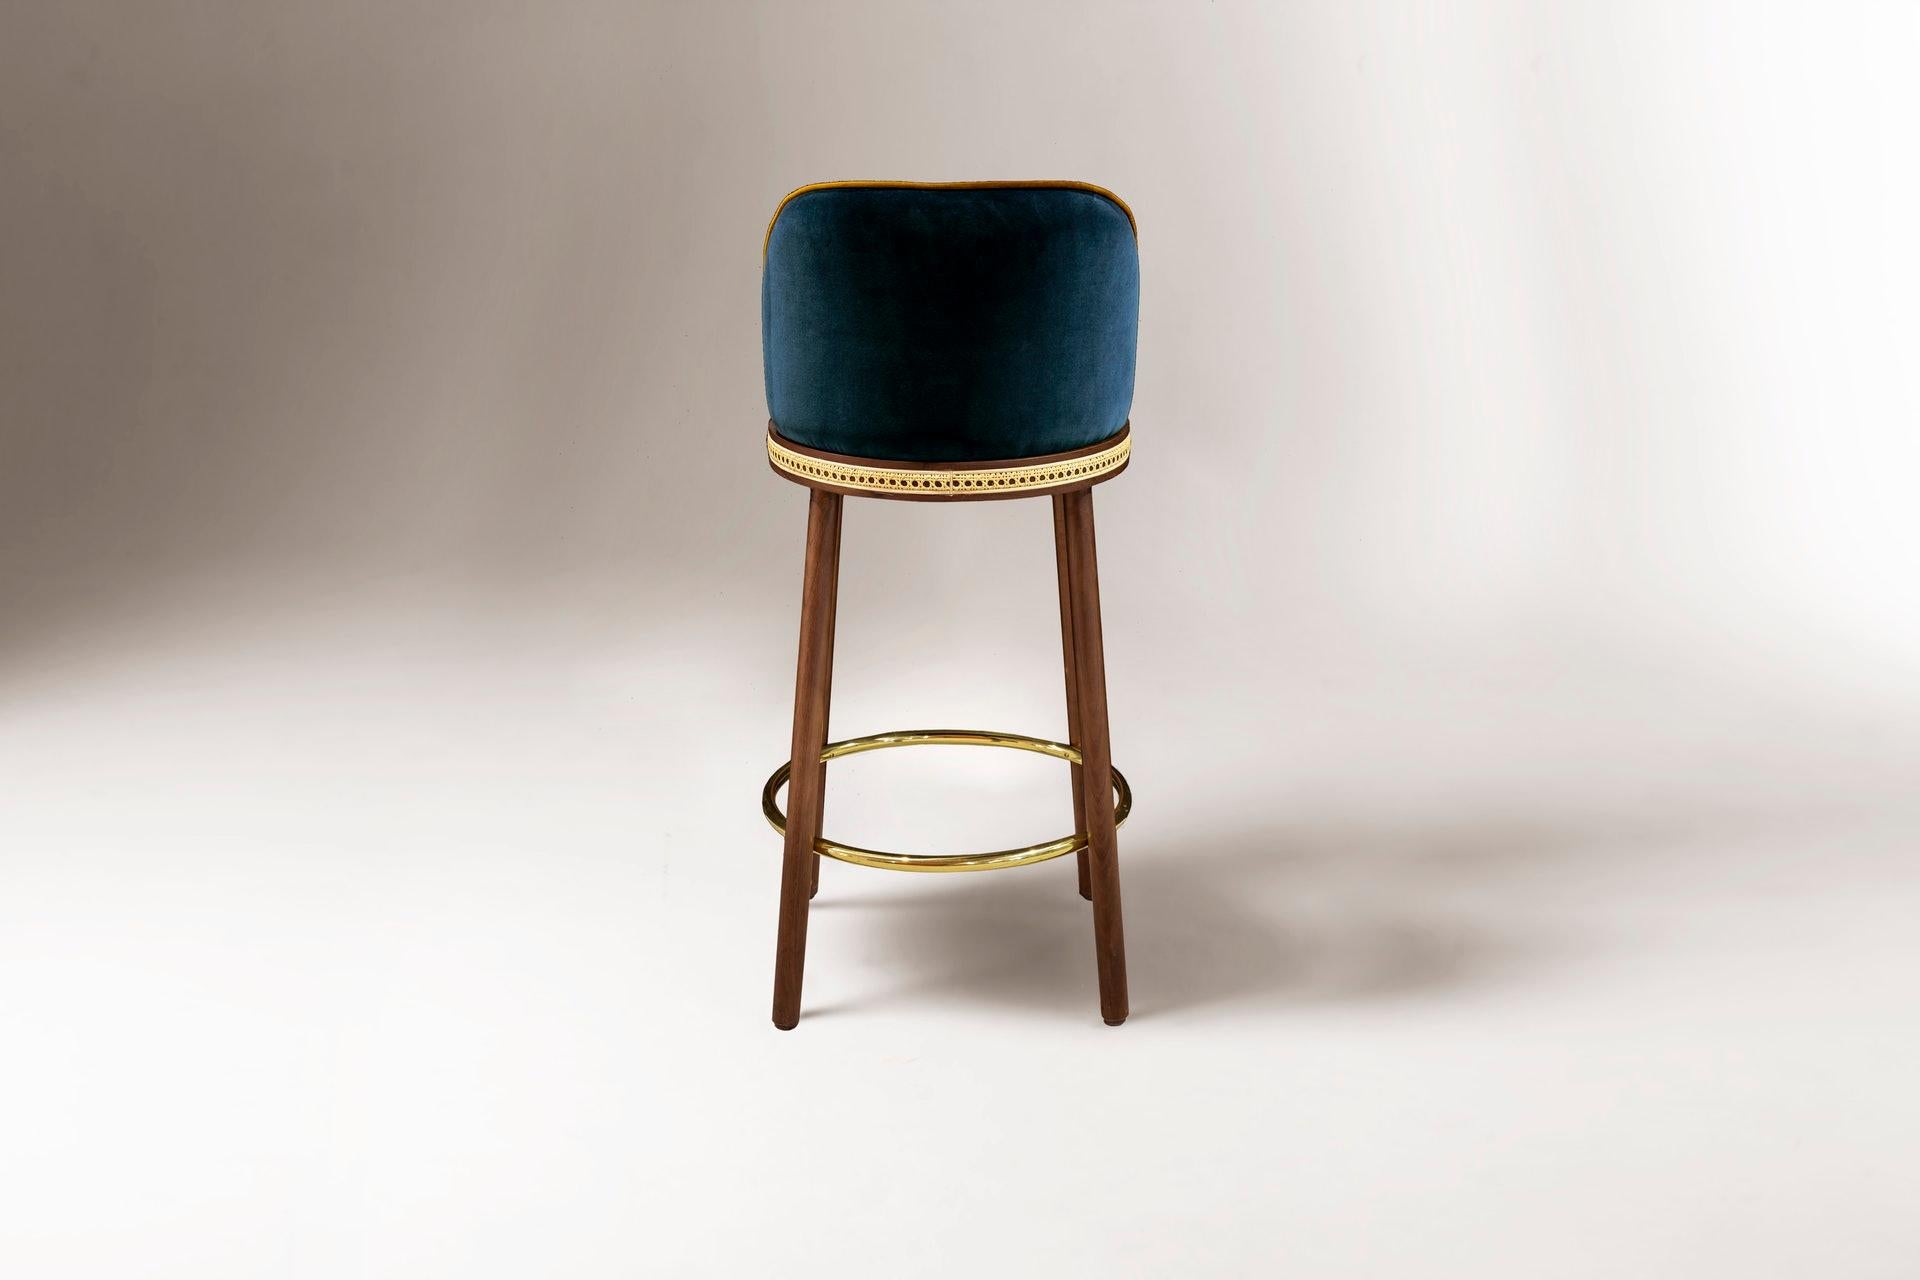 Portuguese DOOQ Mid-Century Modern Bar Chair Alma with Blue Velvet, Walnut Wood and Brass For Sale